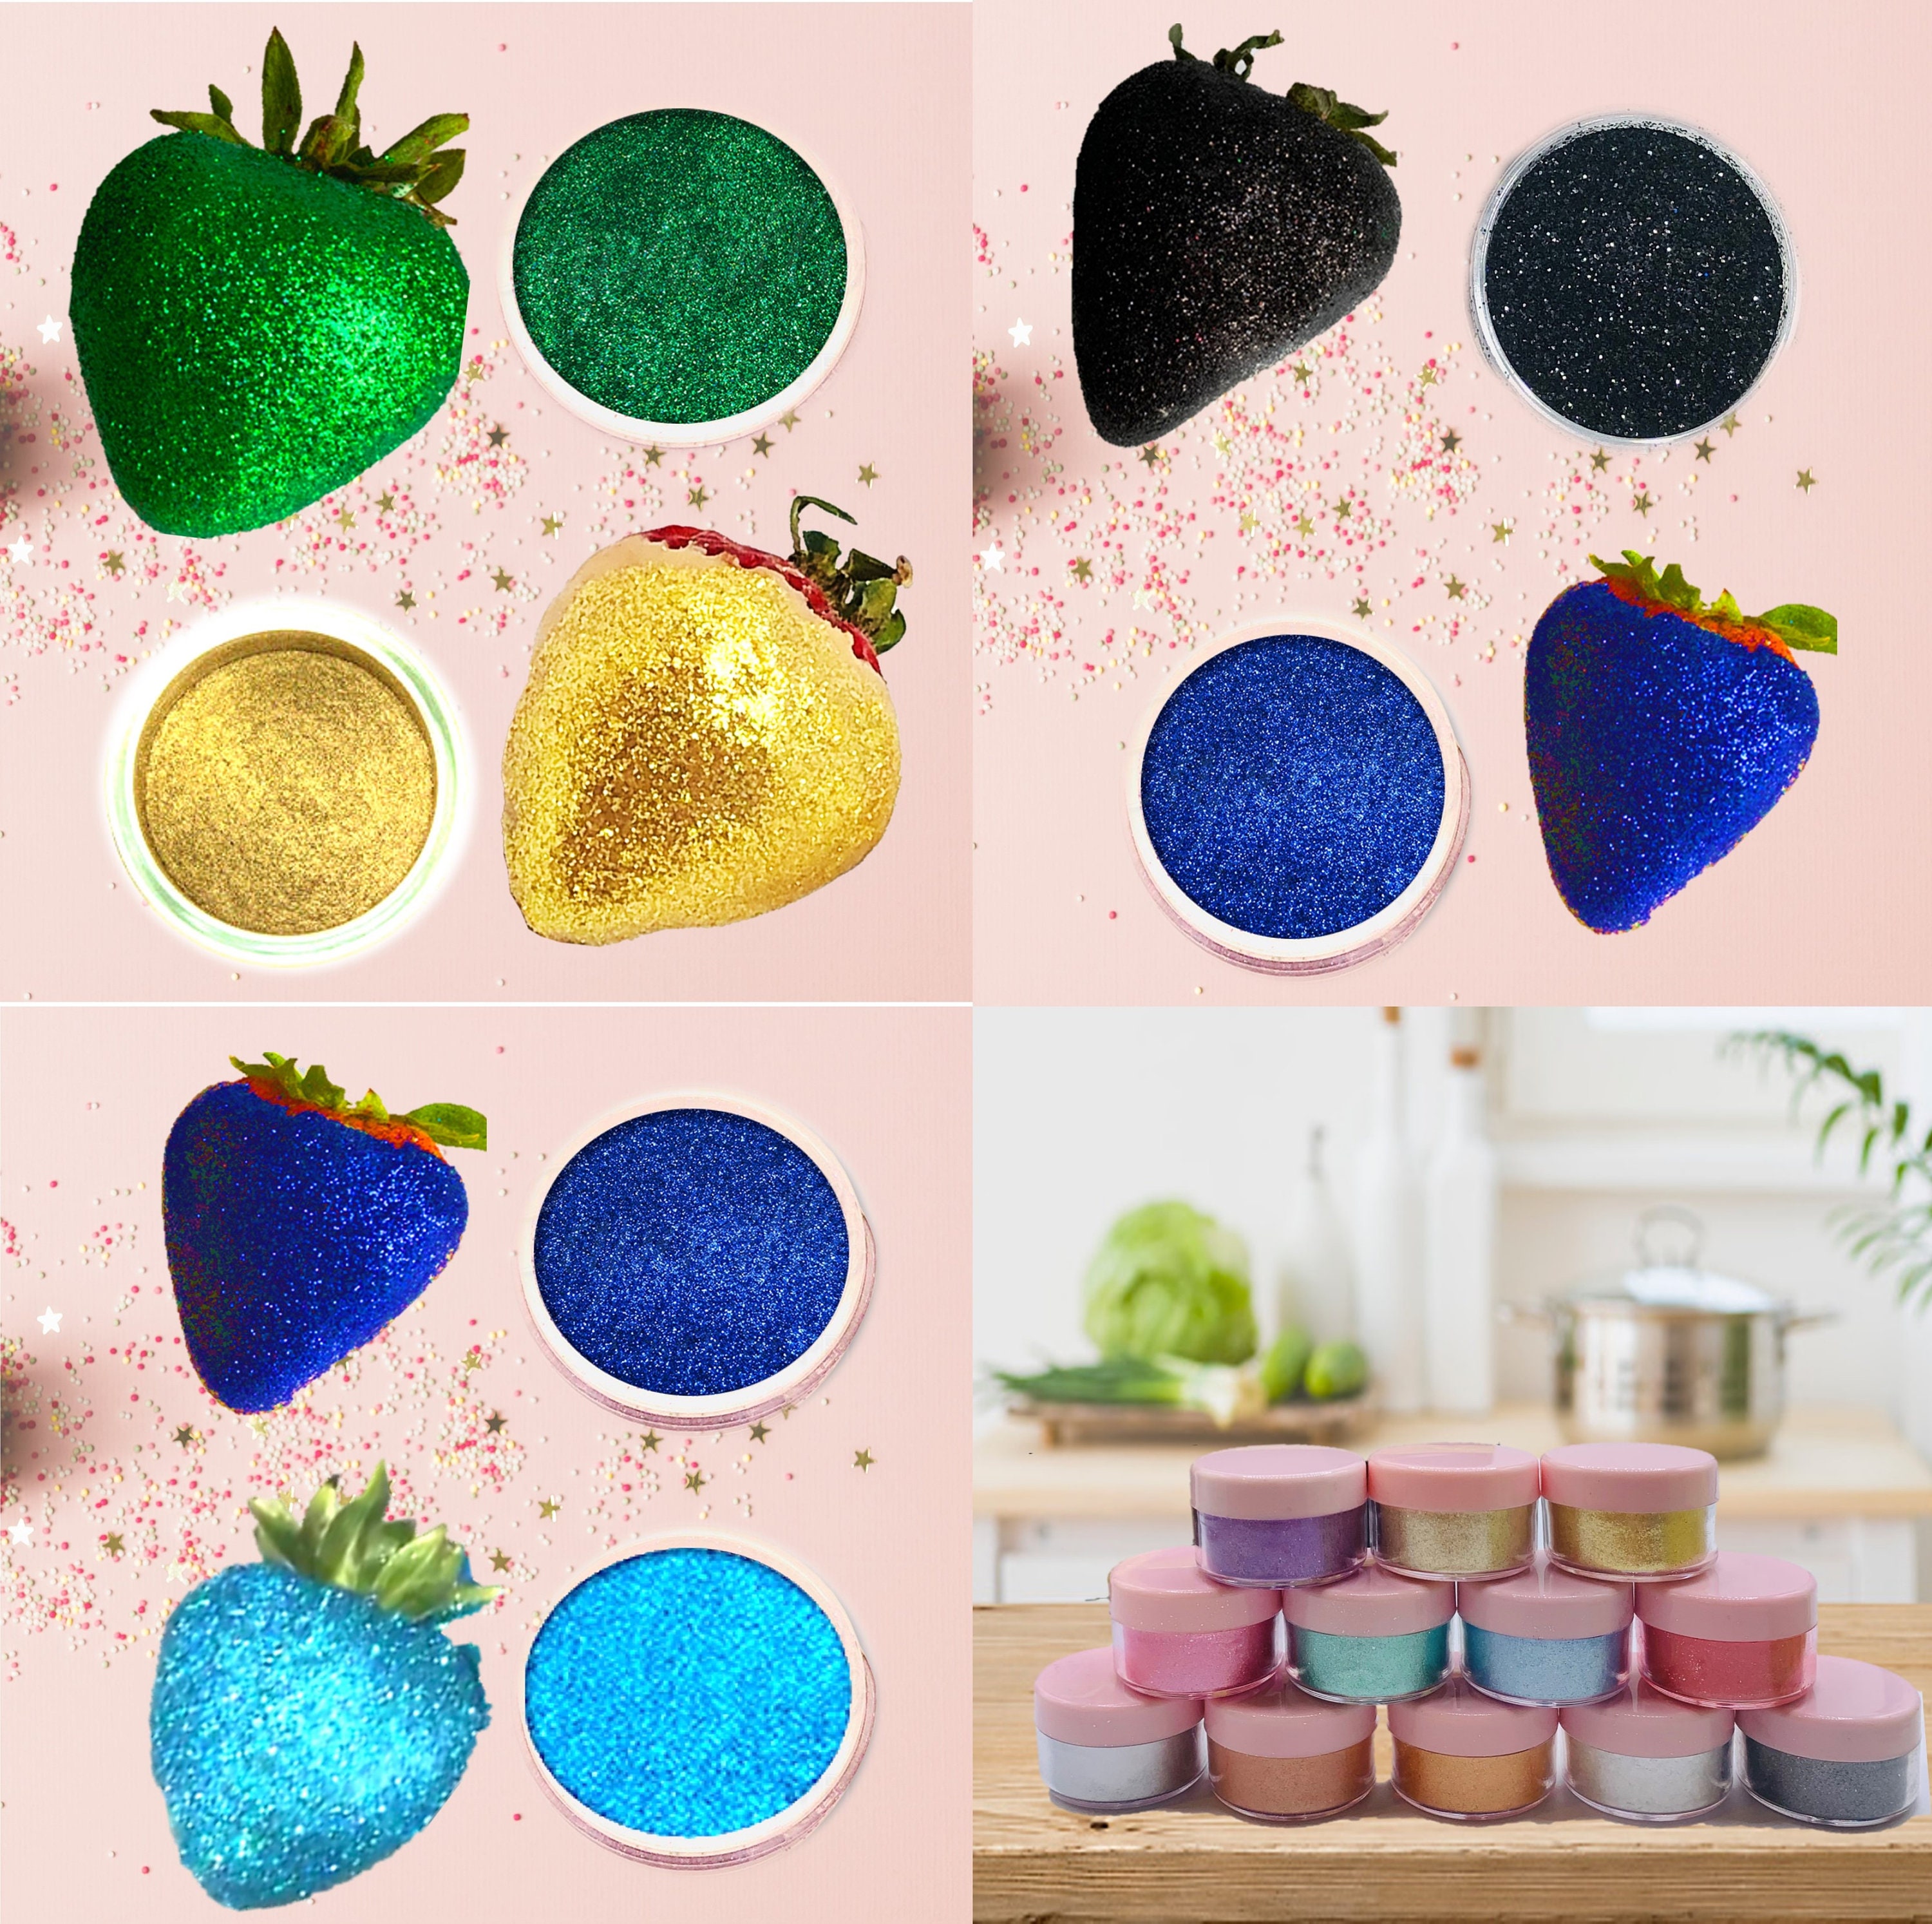 Edible Glitter 11+1 Colors Set, Food Grade Luster Dust, Edible Glitter for  Drinks, Beer, Cake Decorating, Chocolates, Fondant, Strawberries, Cupcakes